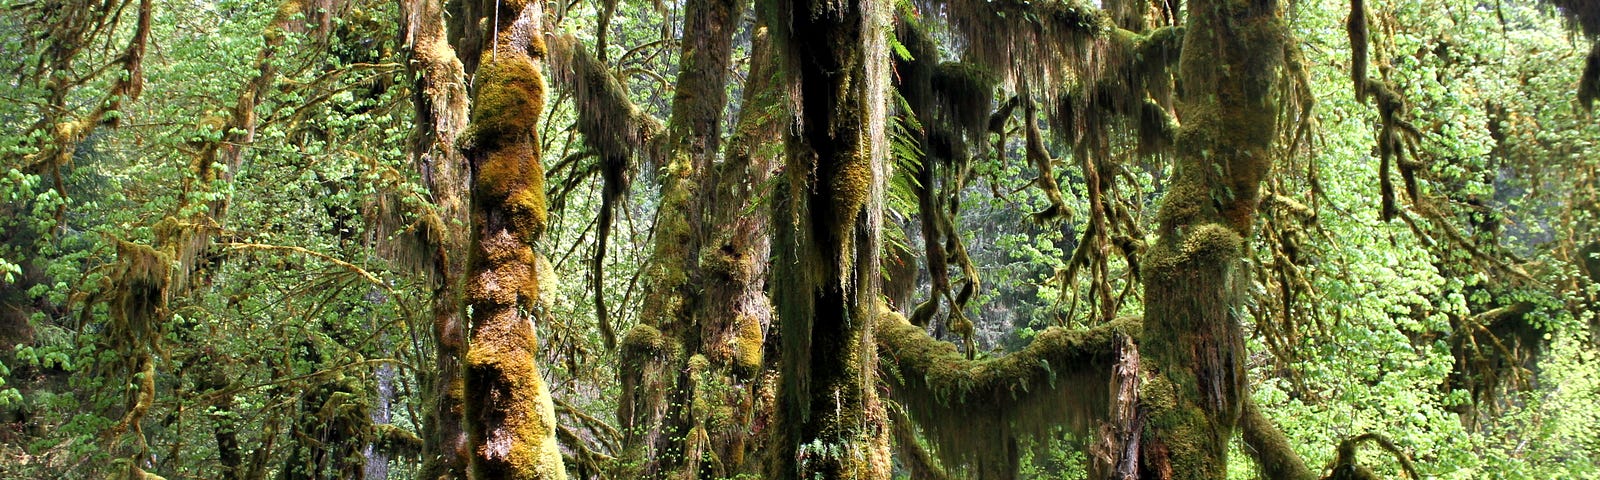 Large trees covered with moss